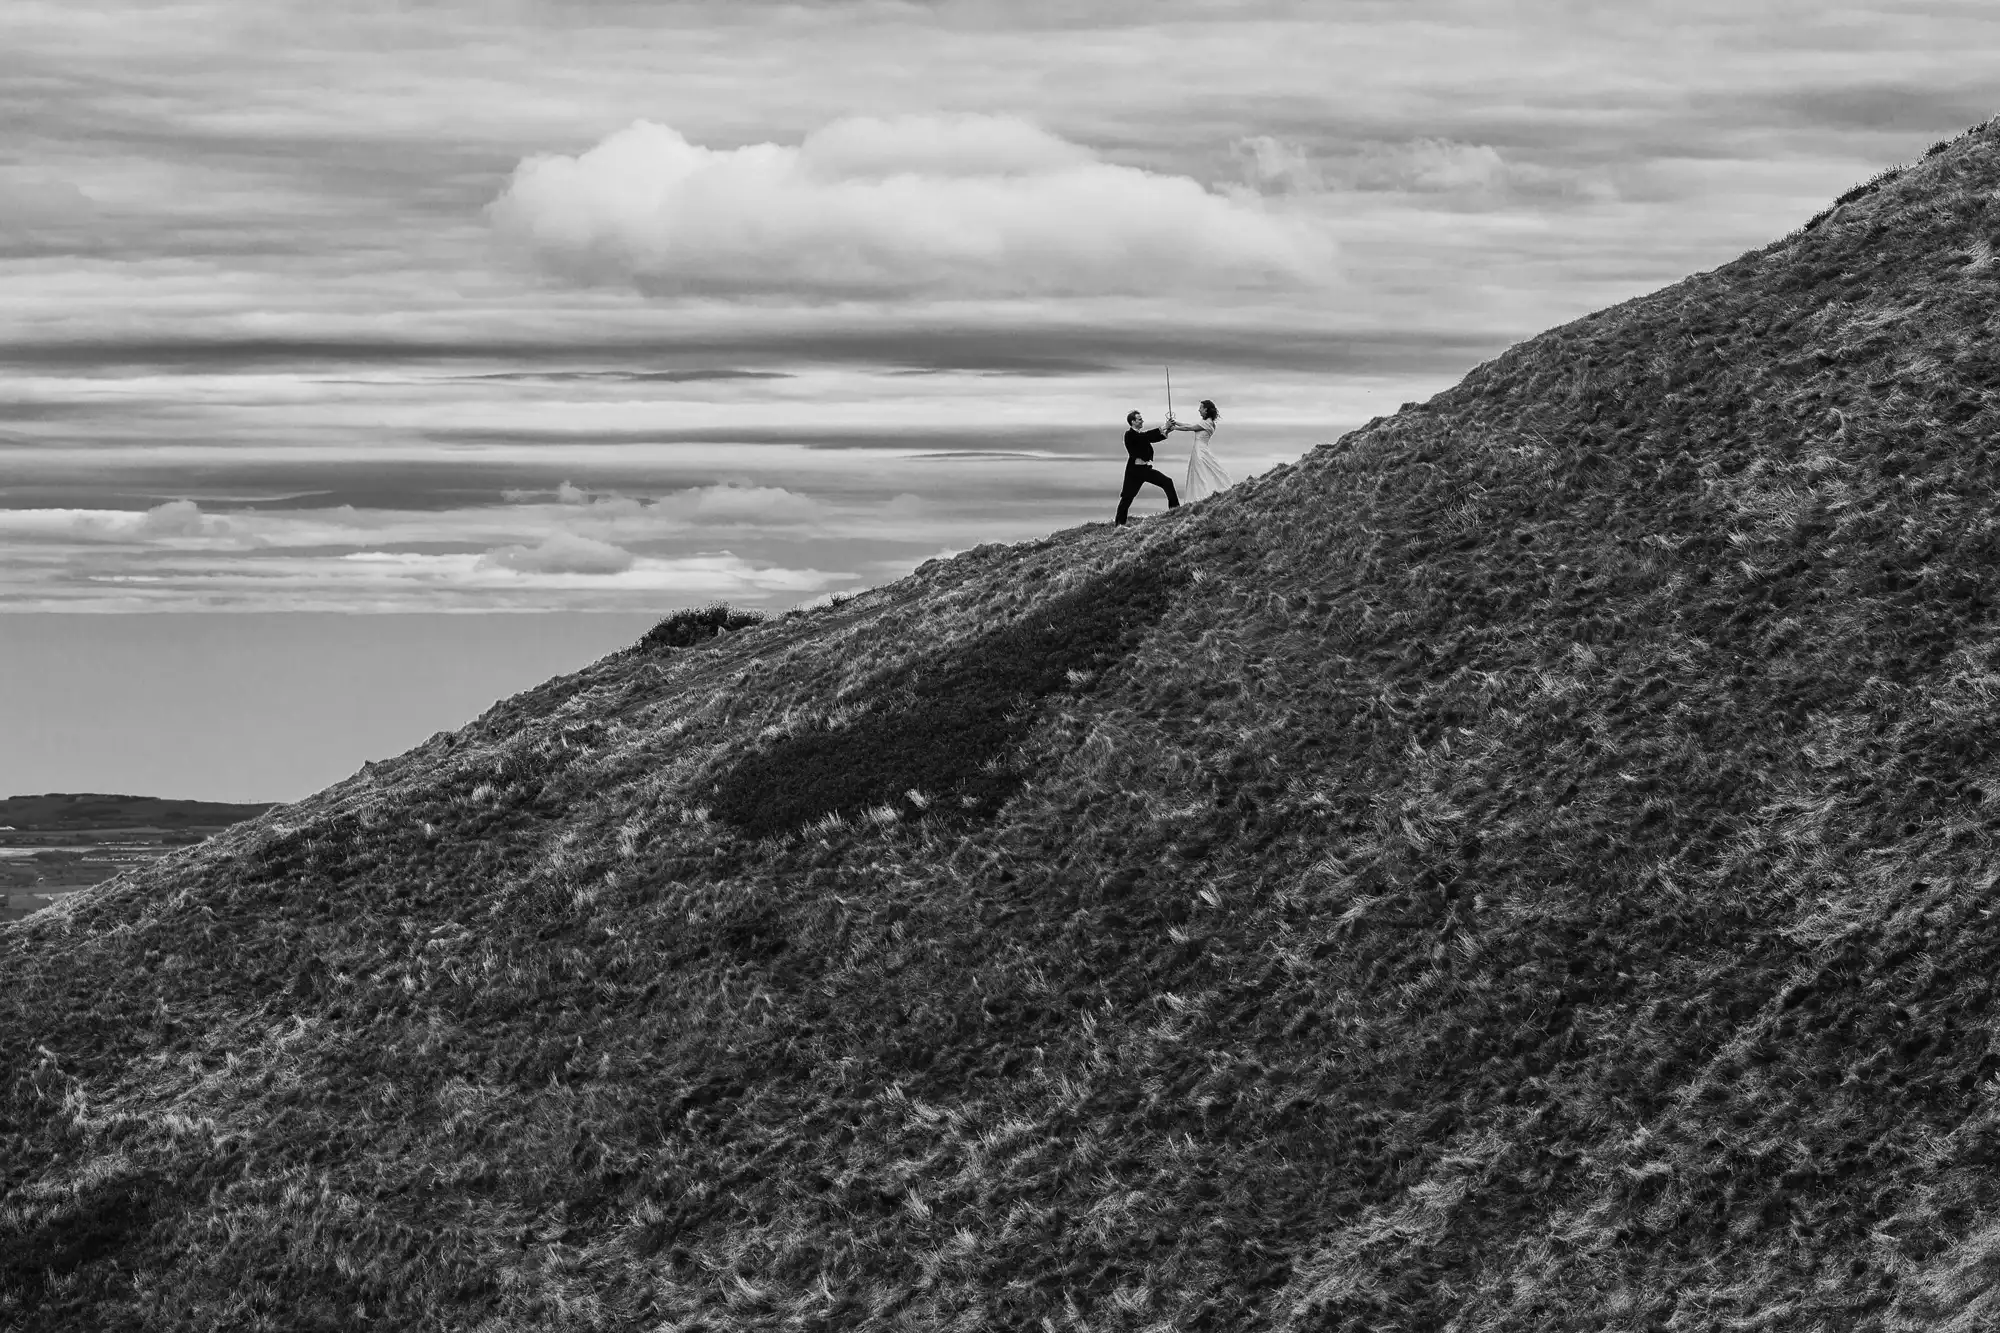 A person hiking up a steep, grassy hill under a cloudy sky, gazing into the distance.